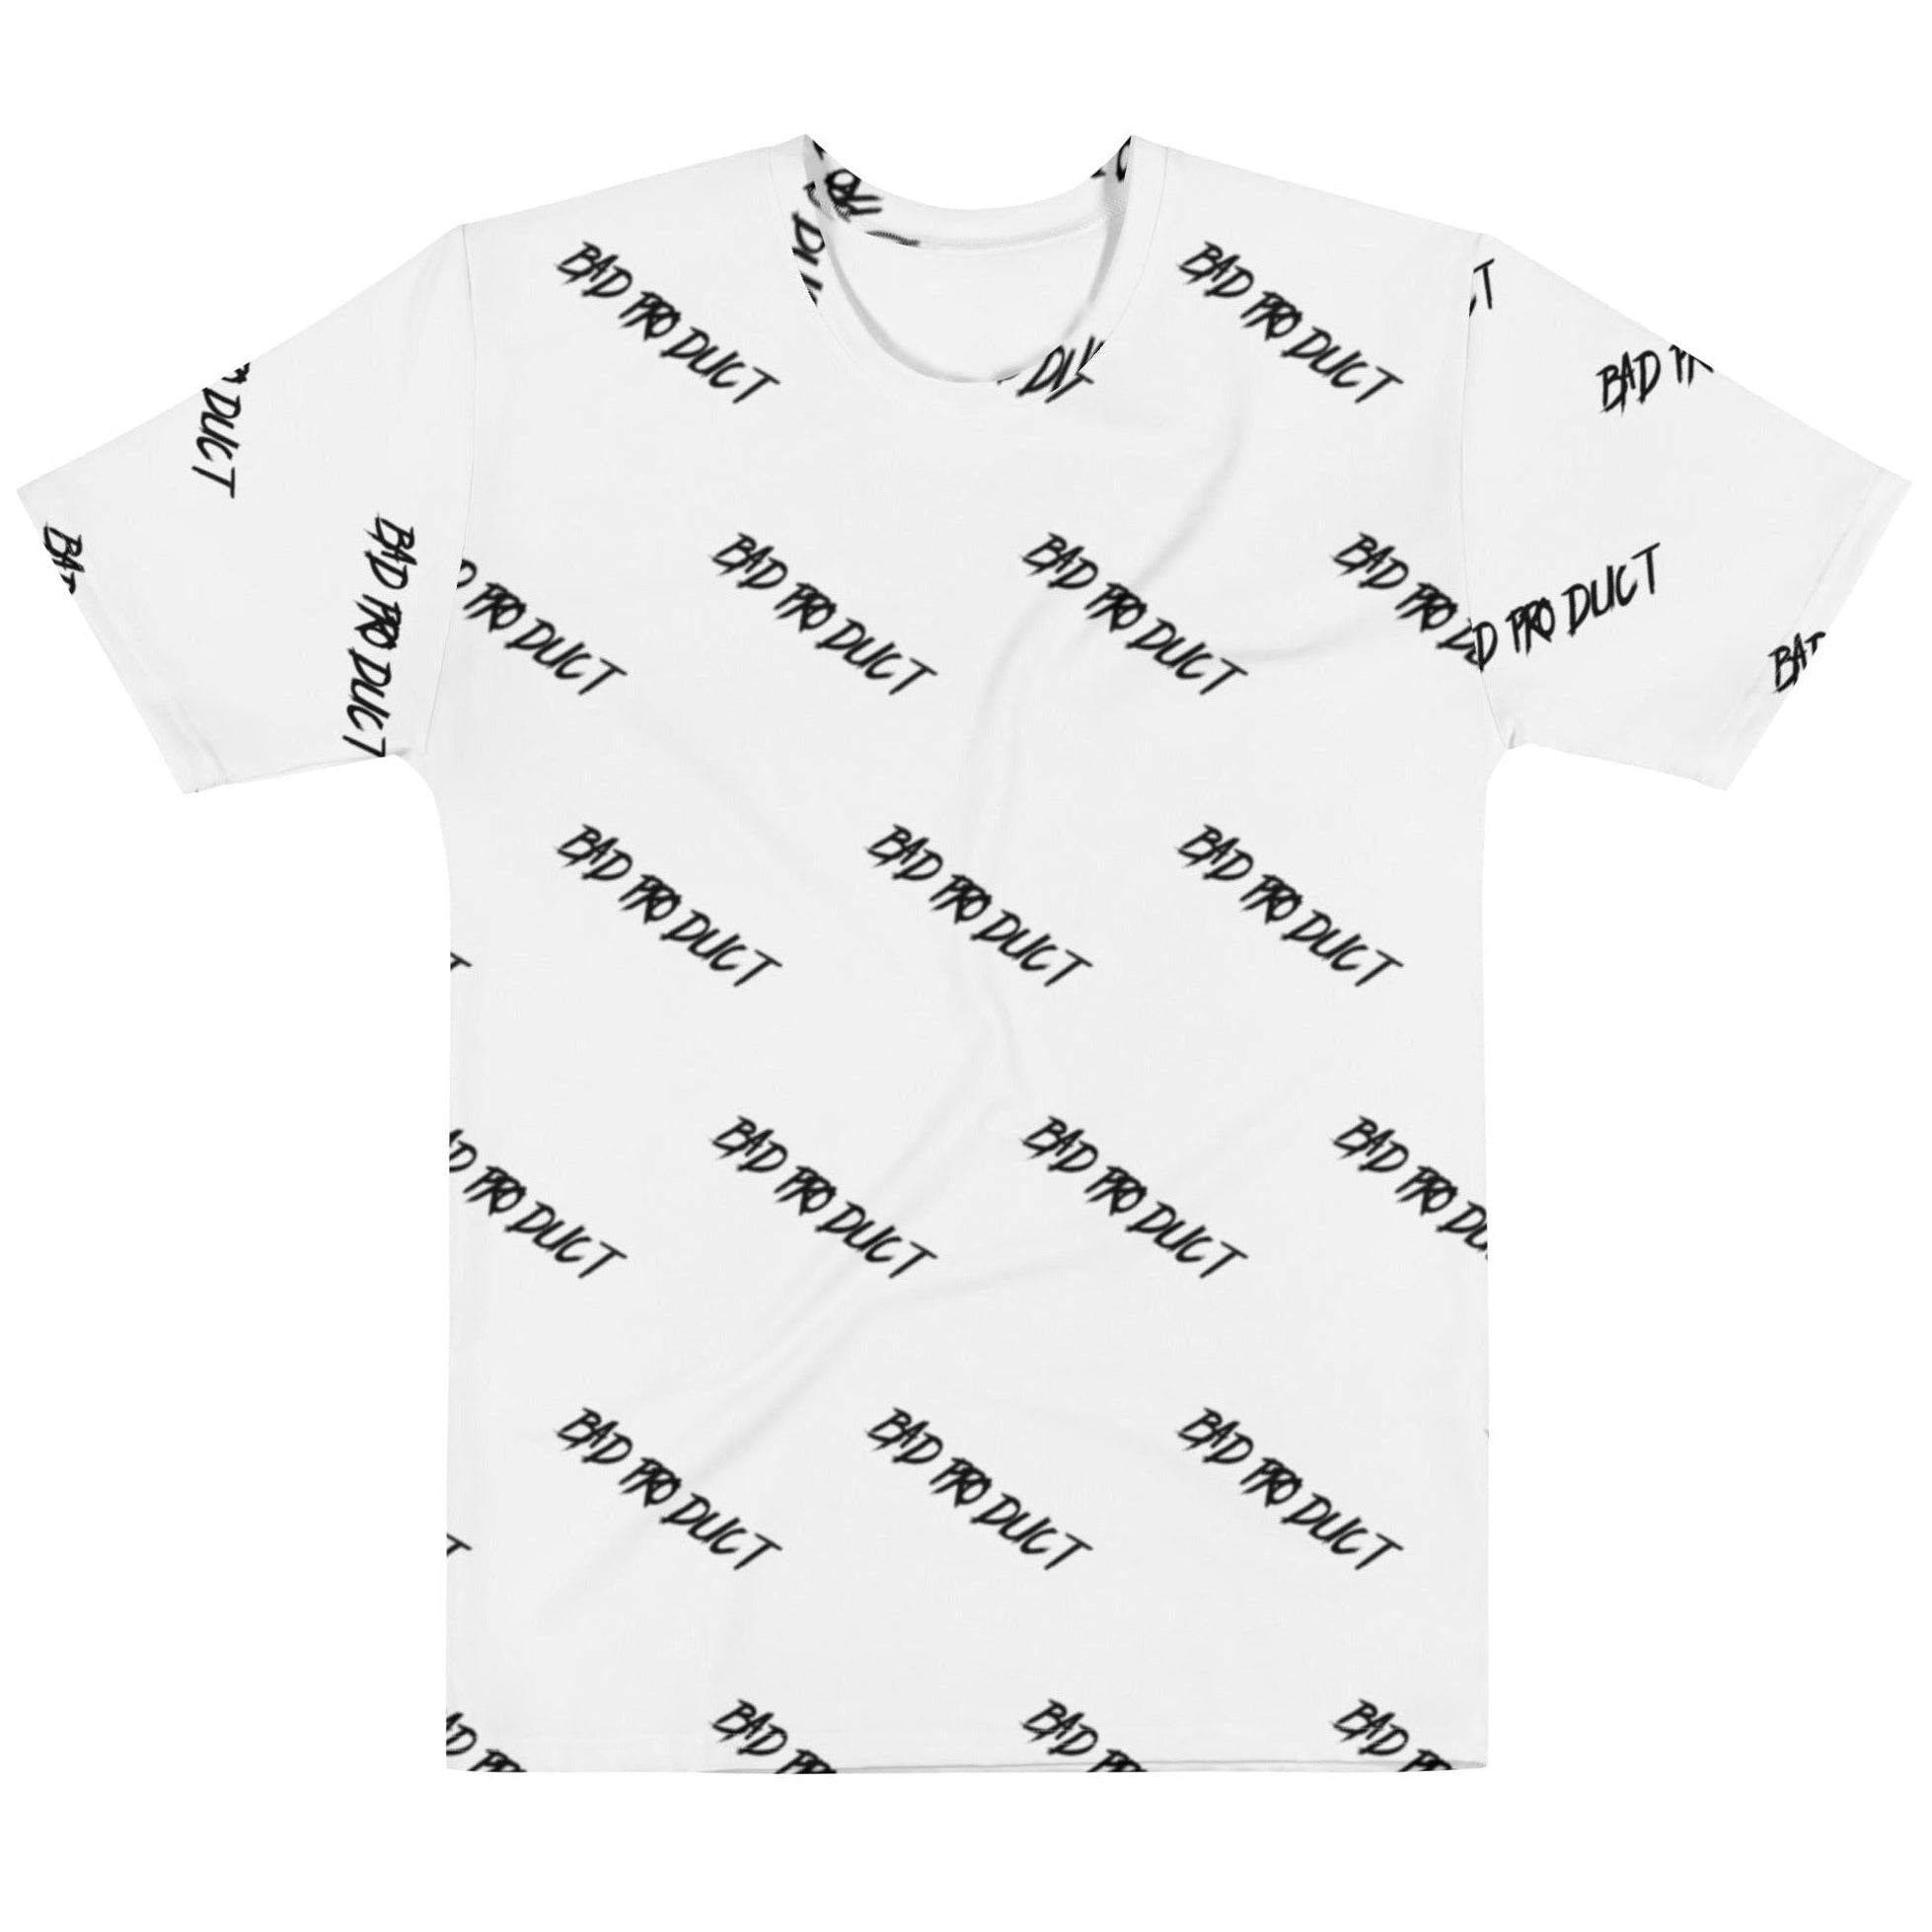 Front view of the 'All Bad Tee' with a white background and black lettering